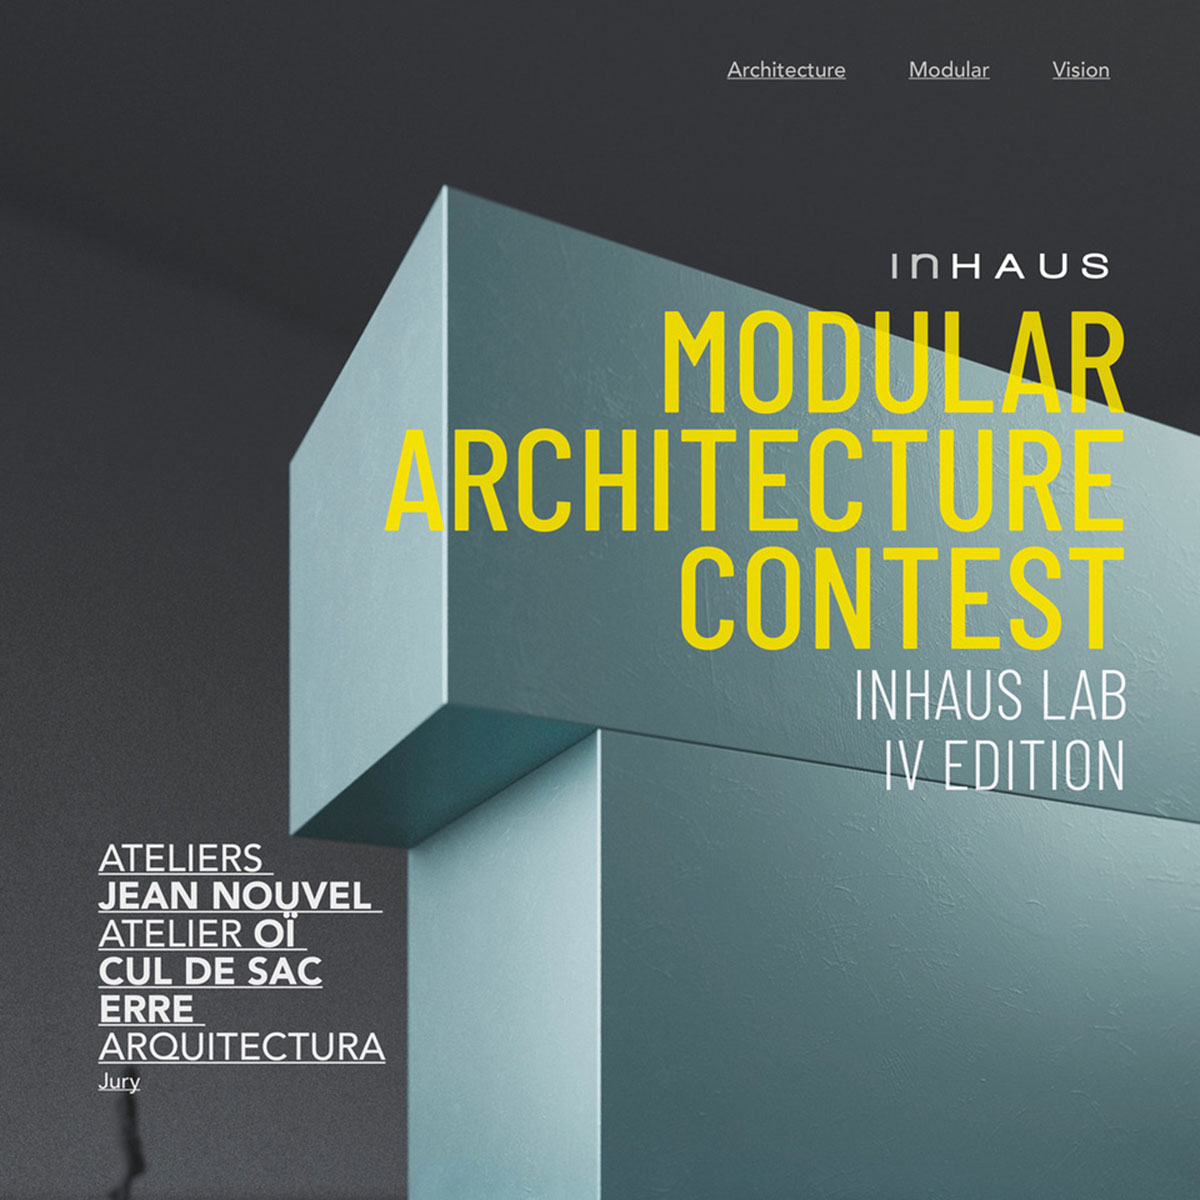 worldarchitecture.org - WA Contents - The 4th edition of inHAUS LAB: Modular Architecture Competition For Students